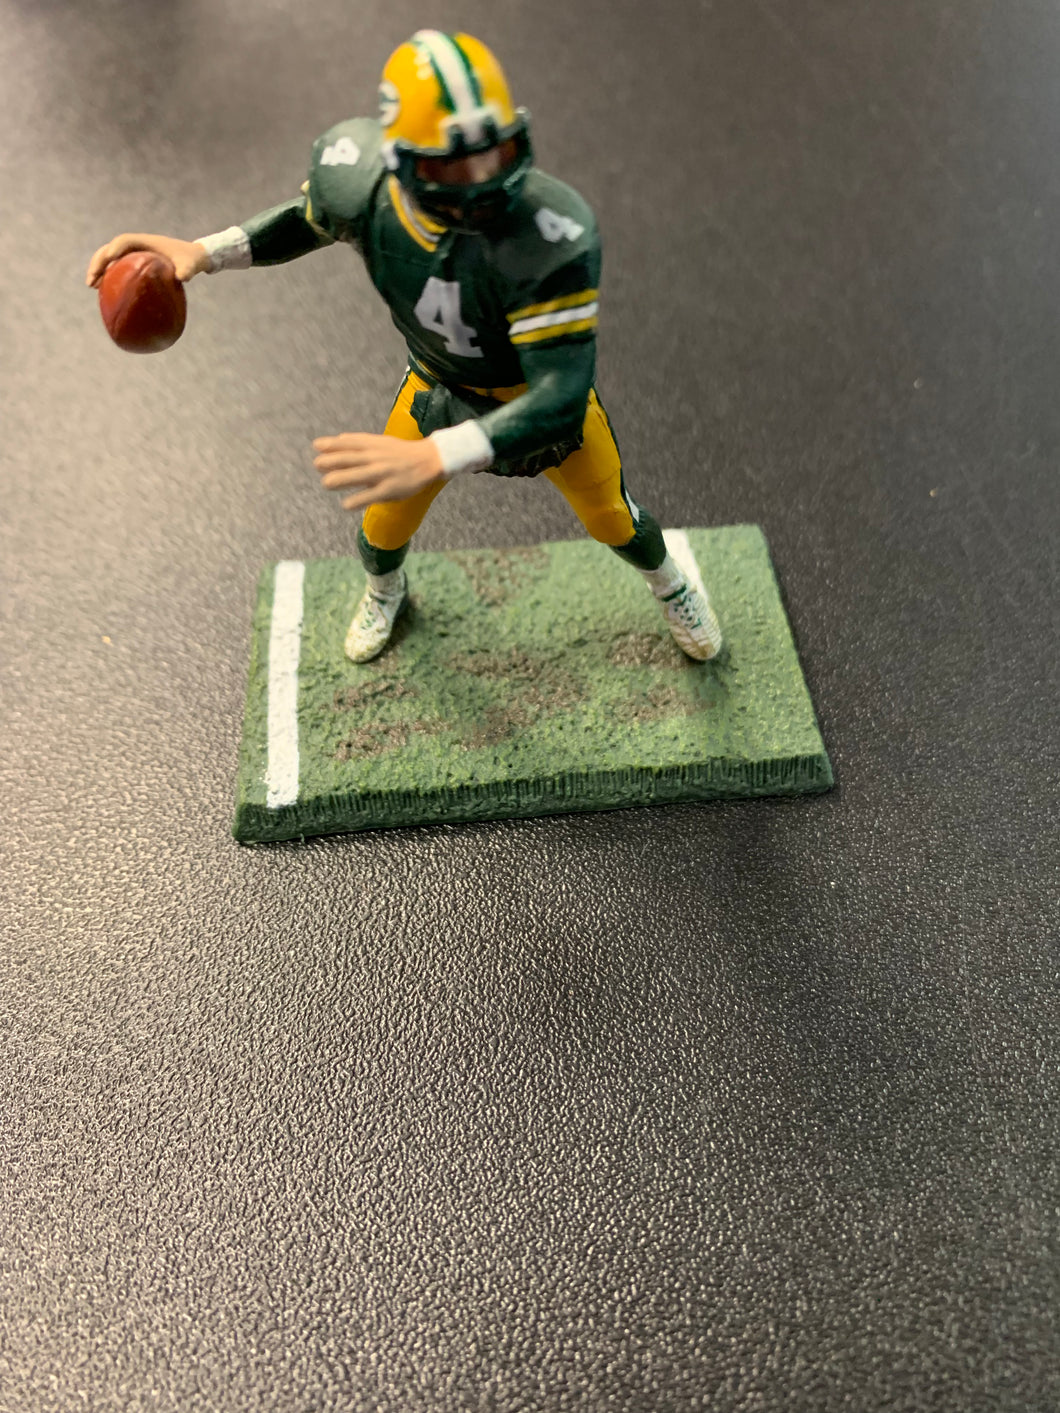 MCFARLANE NFL GREEN BAY PACKERS LOOSE FAVRE 4 MINI FIGURE WITH BASE GREEN JERSEY